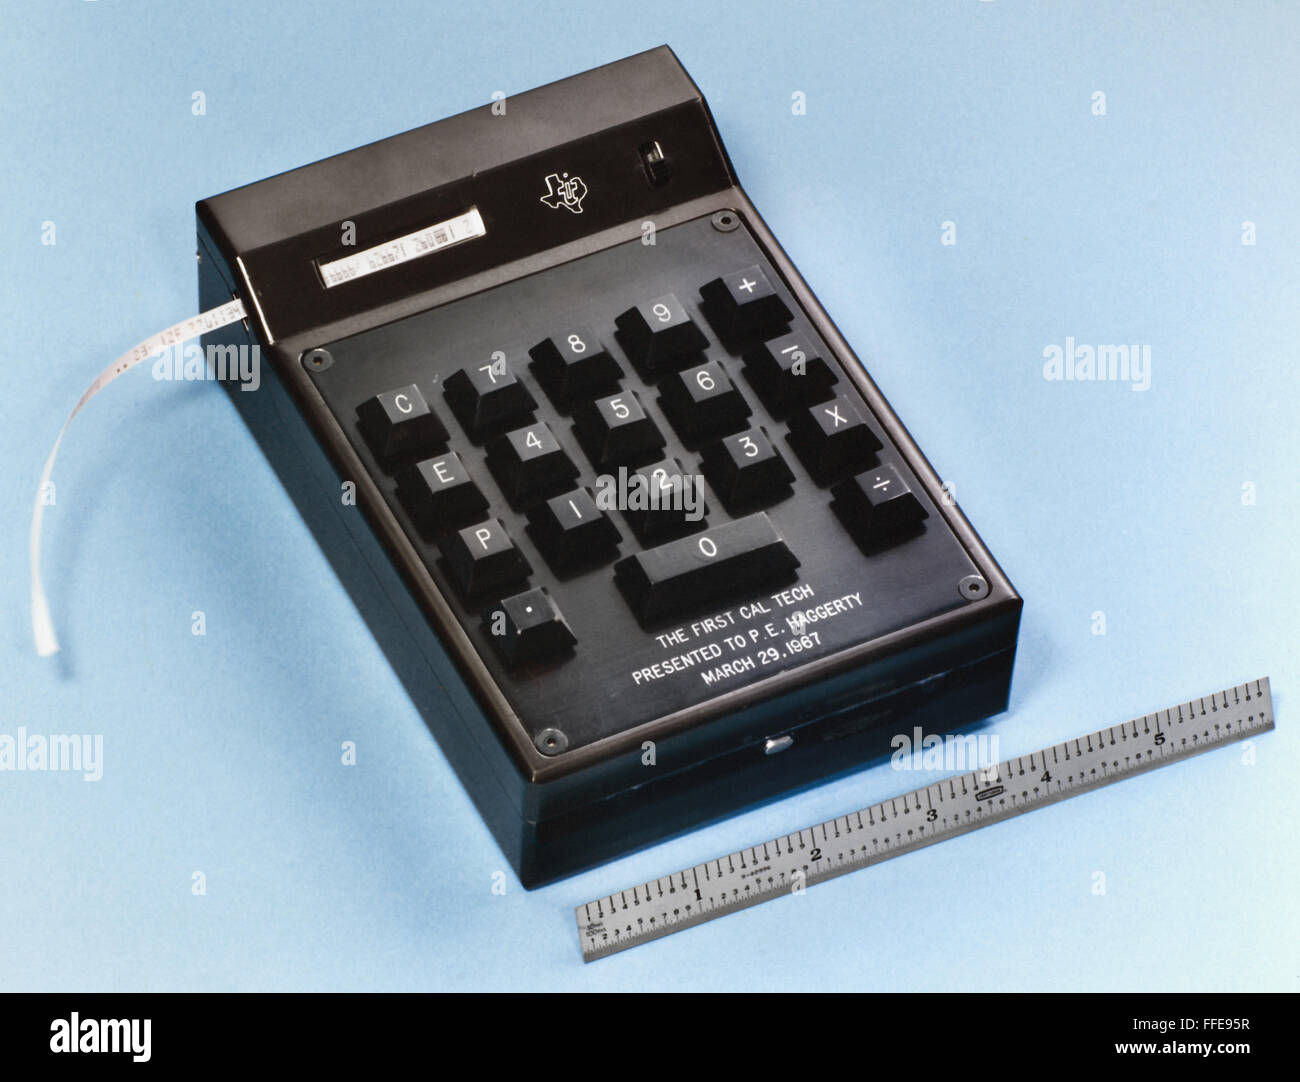 HAND-HELD CALCULATOR, 1967. /nThe first electric hand-held calculator,  known as the Cal-Tech, invented at Texas Instruments in 1967 by Jack S.  Kilby, Jerry D. Merryman, and James Van Tessel Stock Photo -